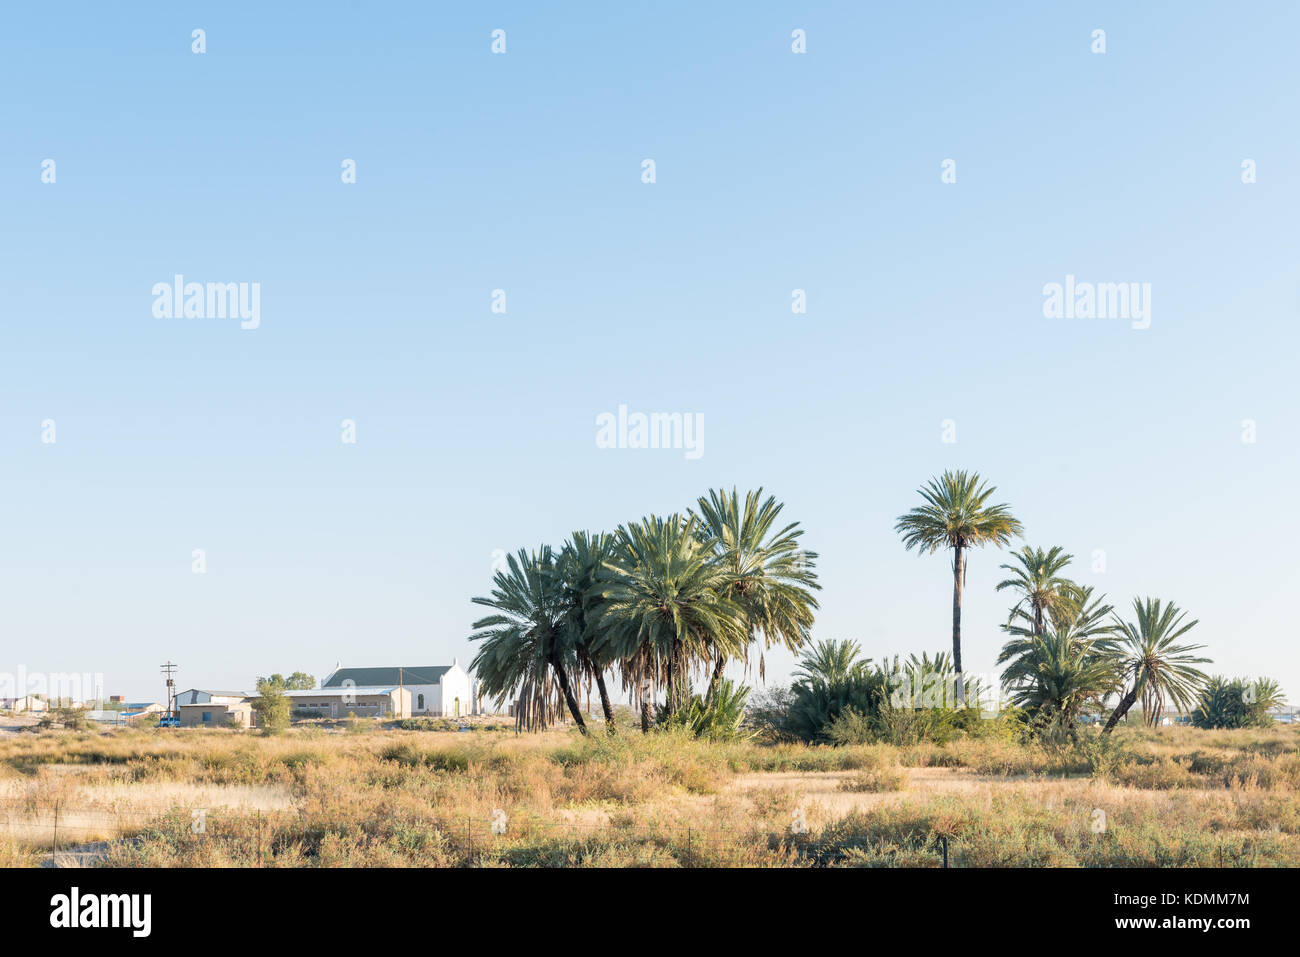 The historic fountain between palm trees in Rietfontein, a small town in the Northern Cape Province of South Africa on the border with Namibia Stock Photo